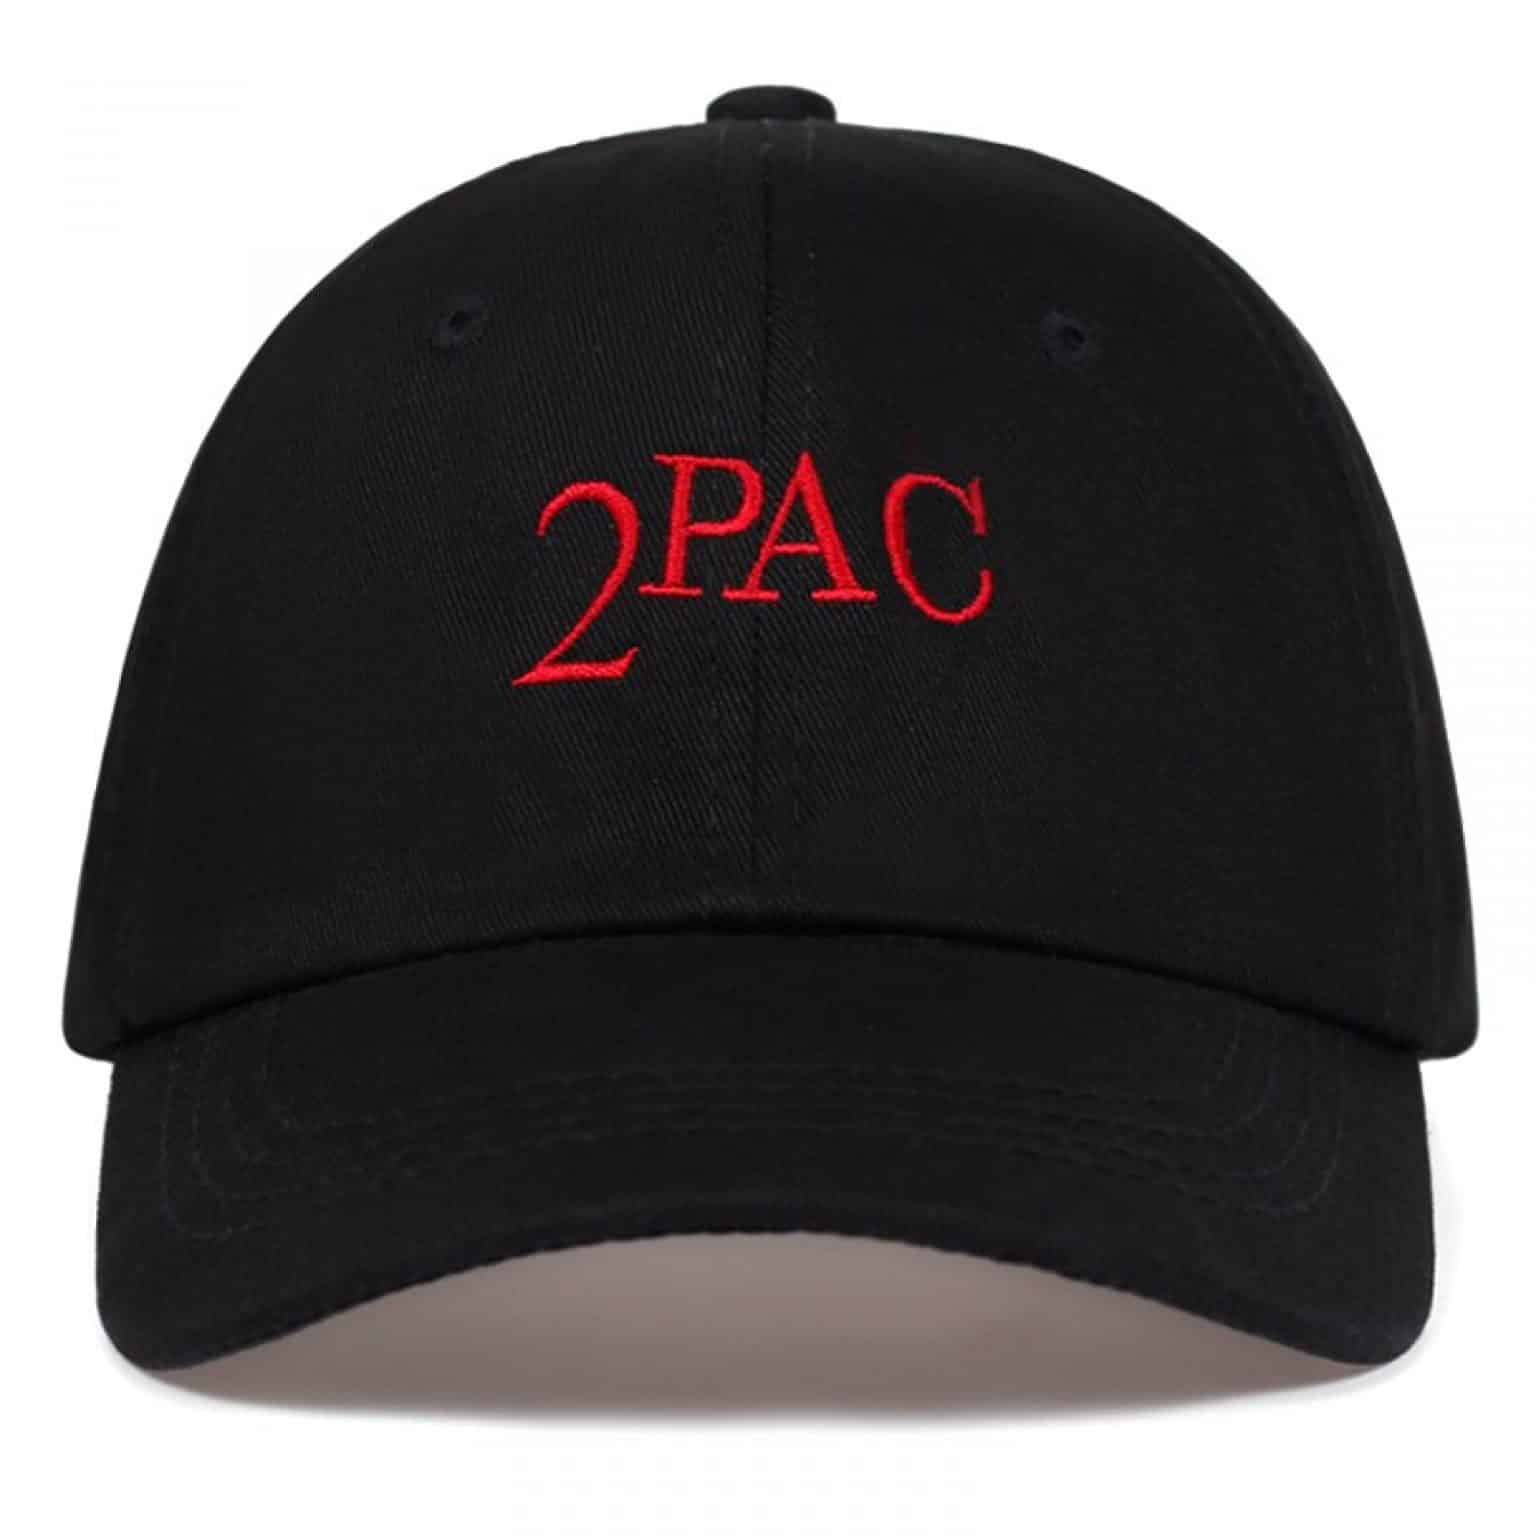 Tupac Hat | 2Pac Hat | Cool Hats For Men and Women | Cheap Dad Hats